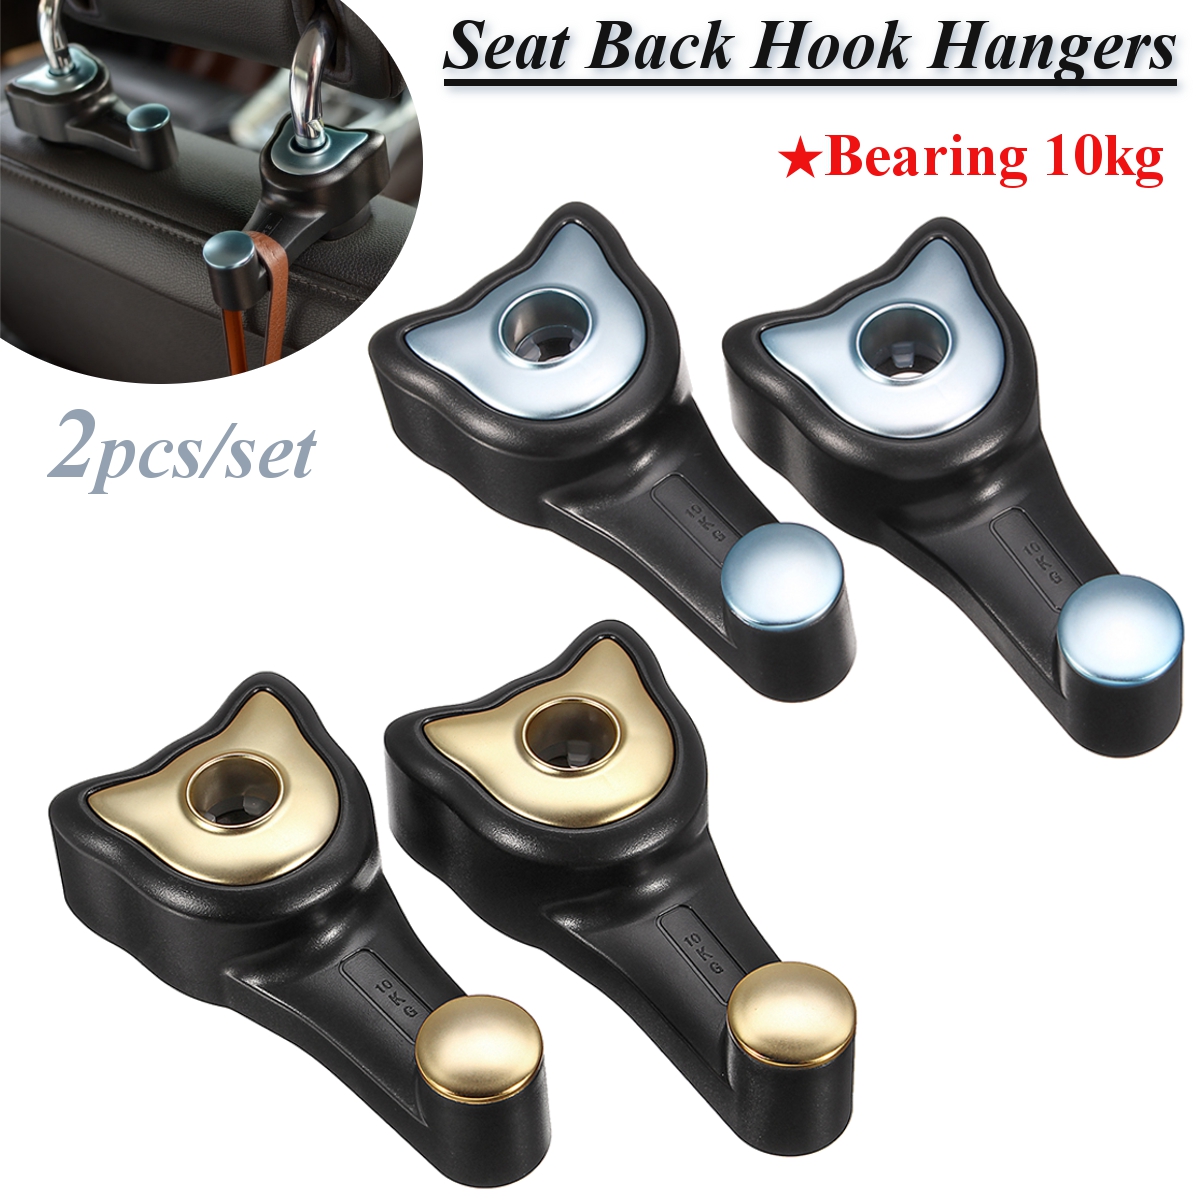 2pcs-ABS-Car-Seat-Back-Hook-Headrest-Hangers-Vehicle-Interior-Bag-Holder-Clip-with-Button-1283195